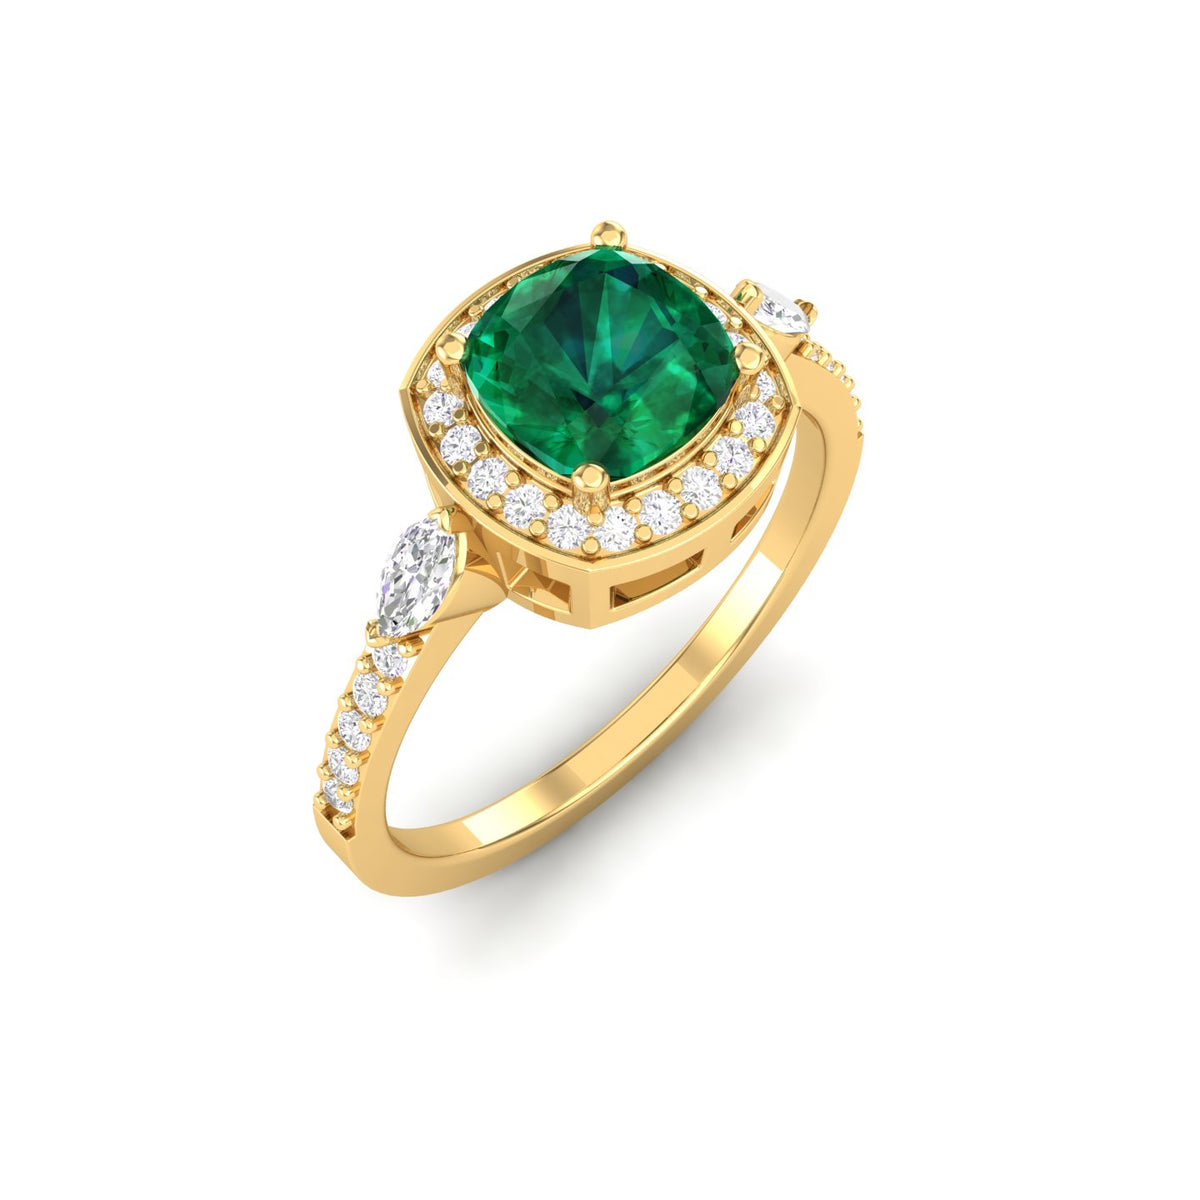 Maurya Victoria Solitaire Cushion Emerald Engagement Ring with Diamond Halo